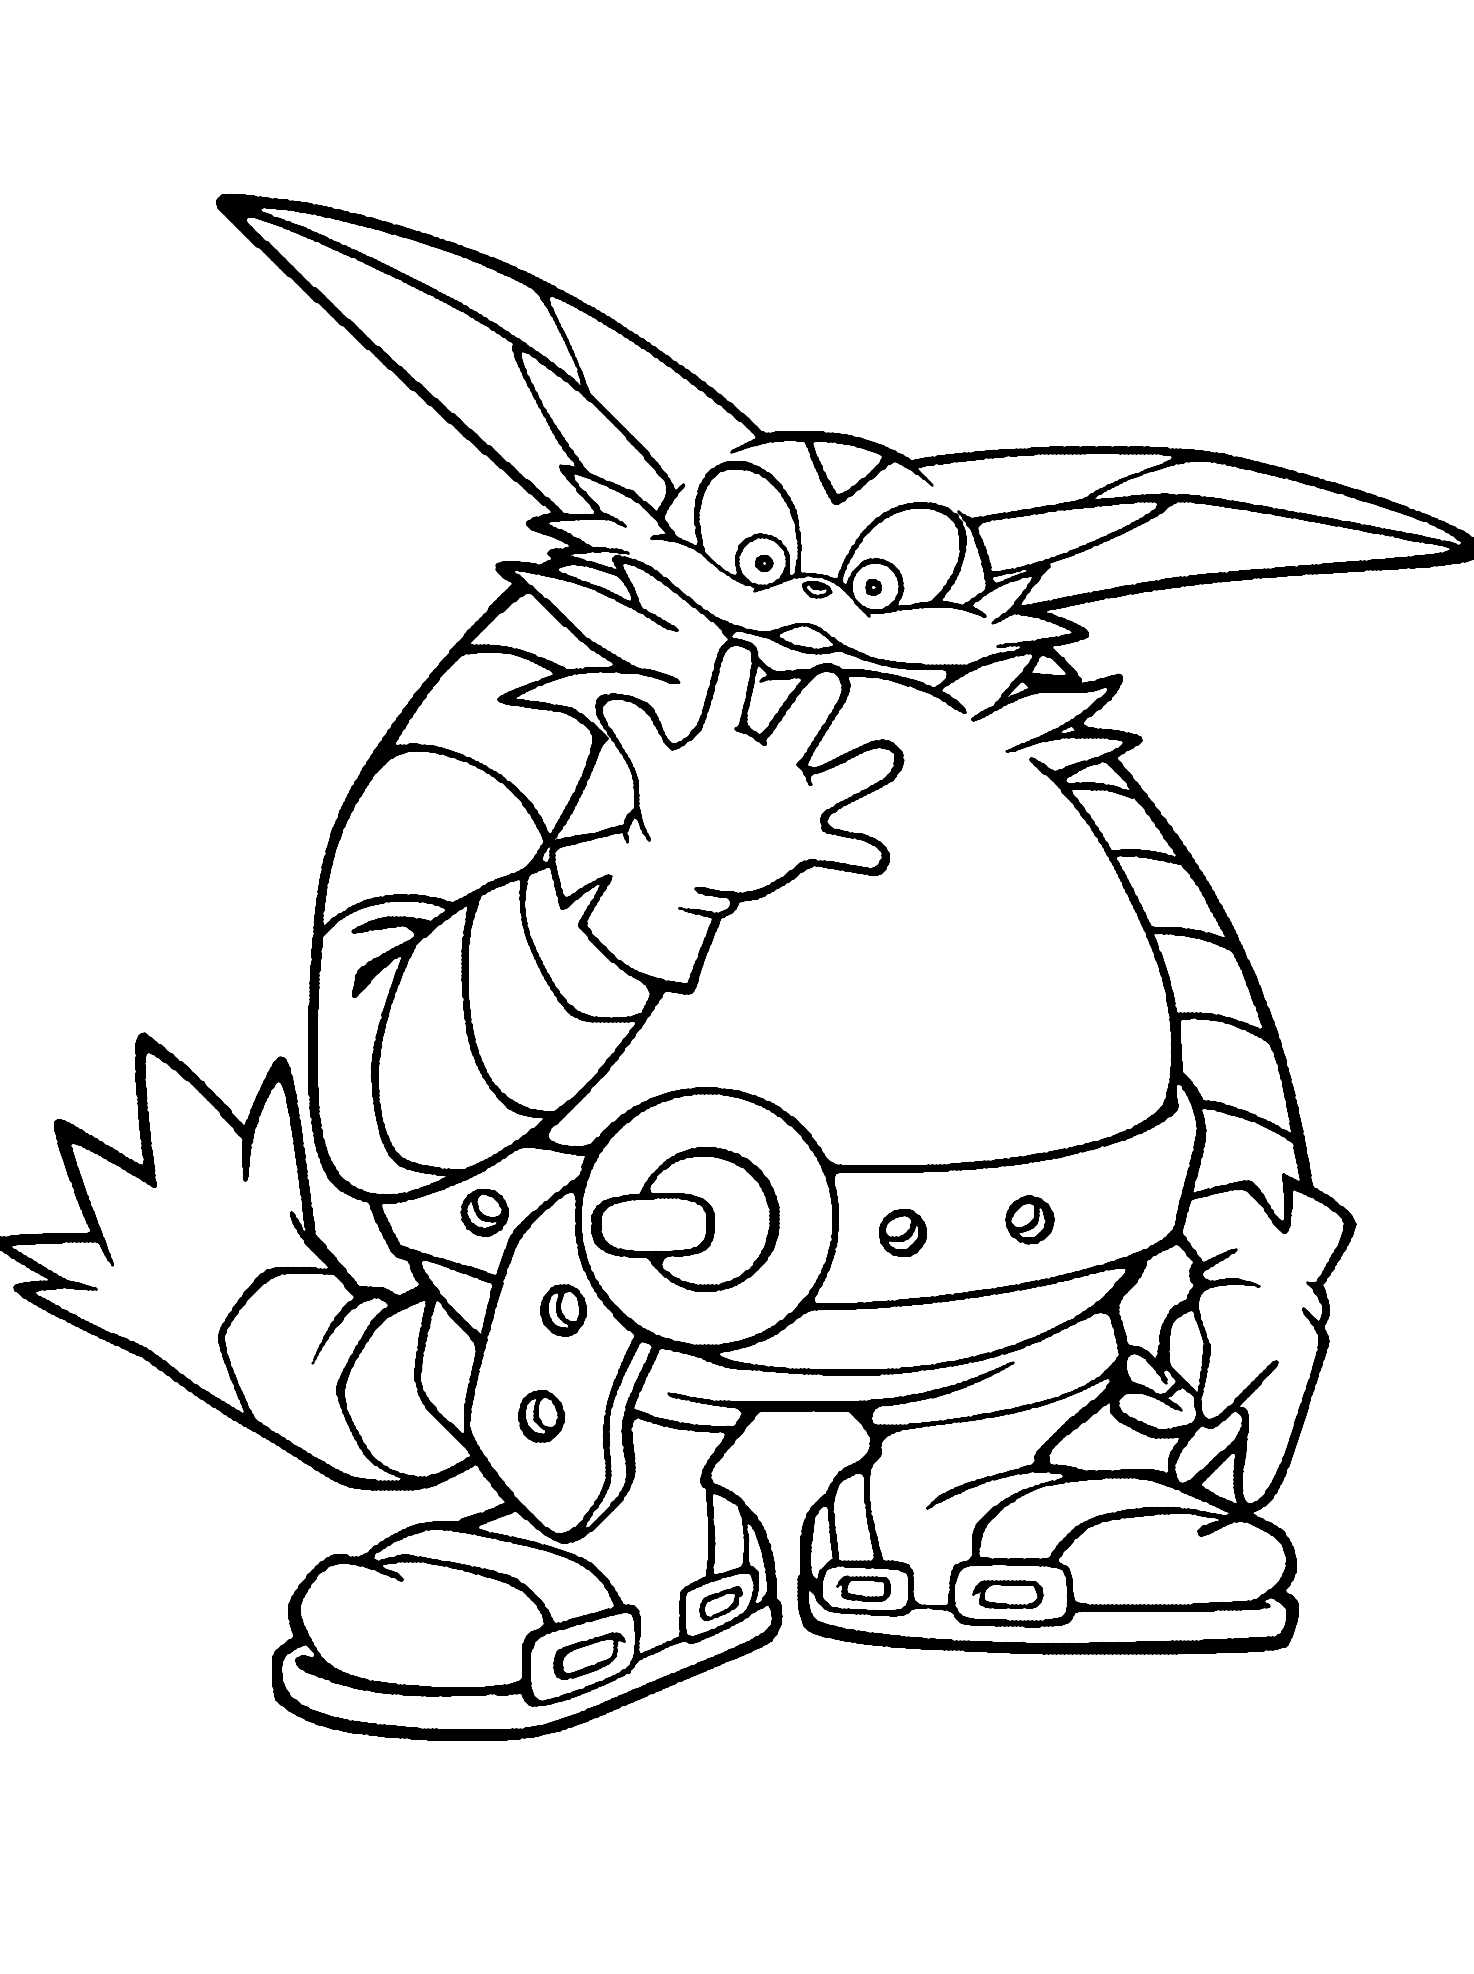 Coloring page - Big the Cat